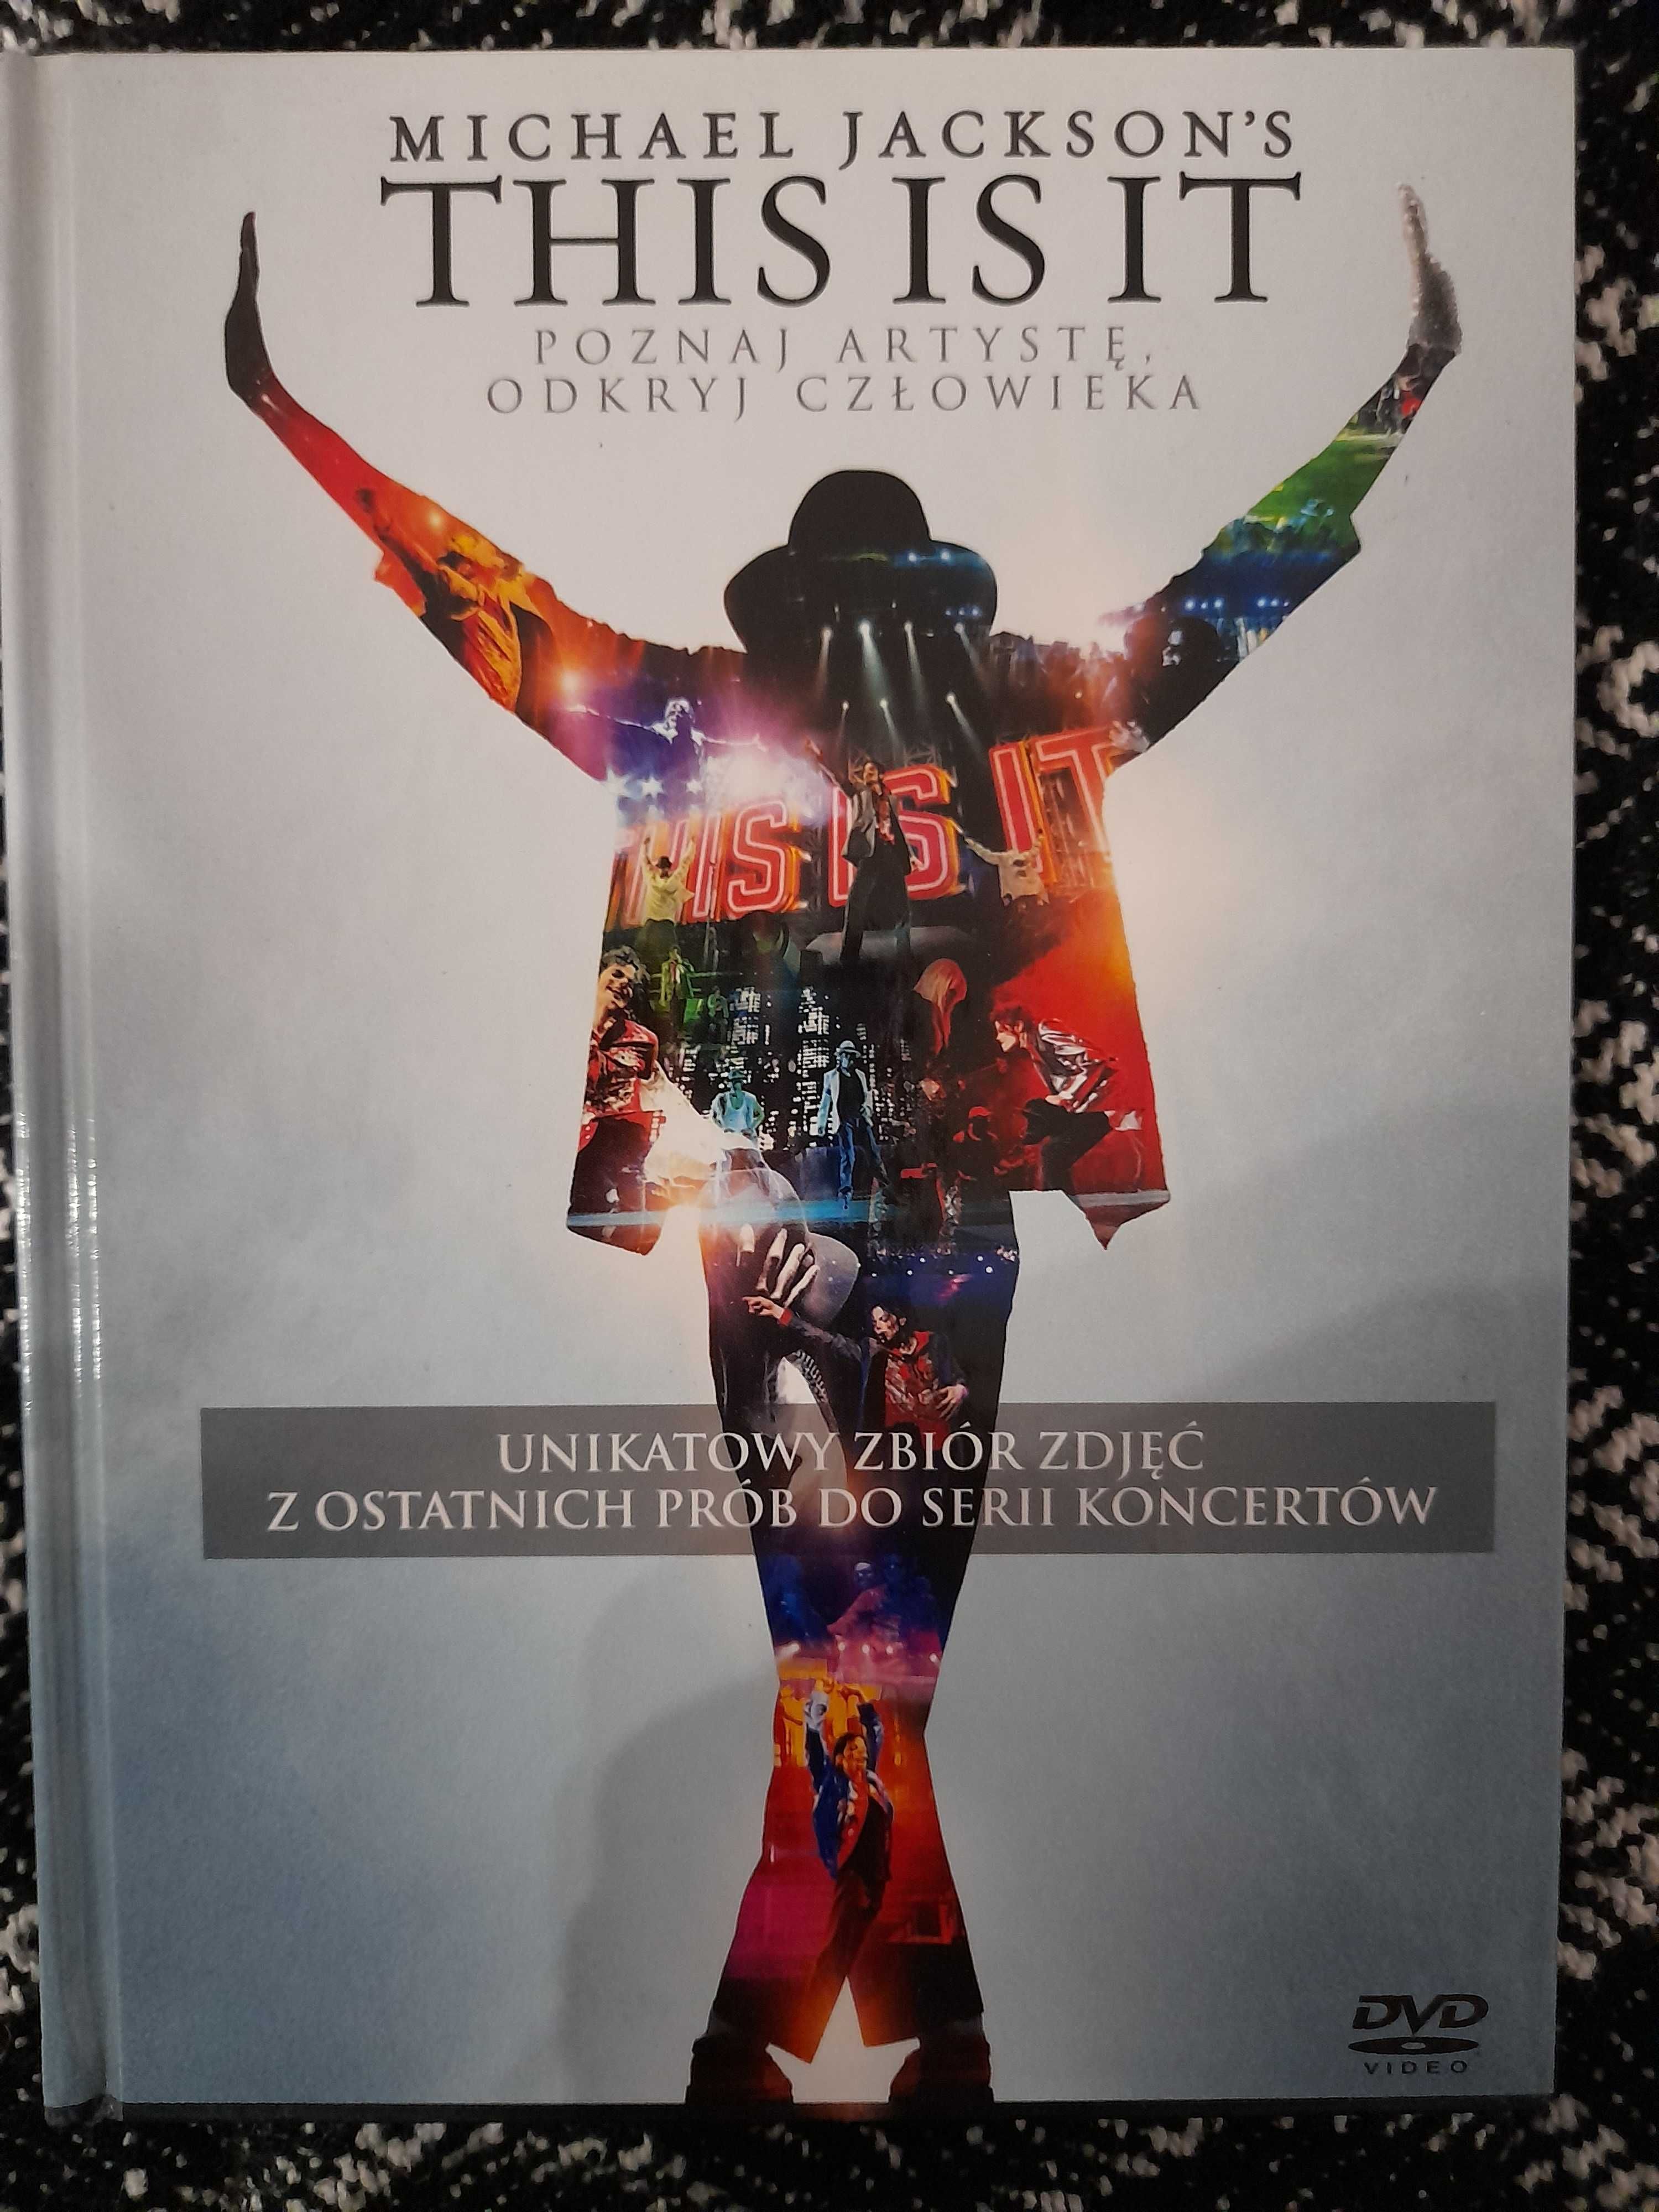 DVD Michael Jackson's This is it